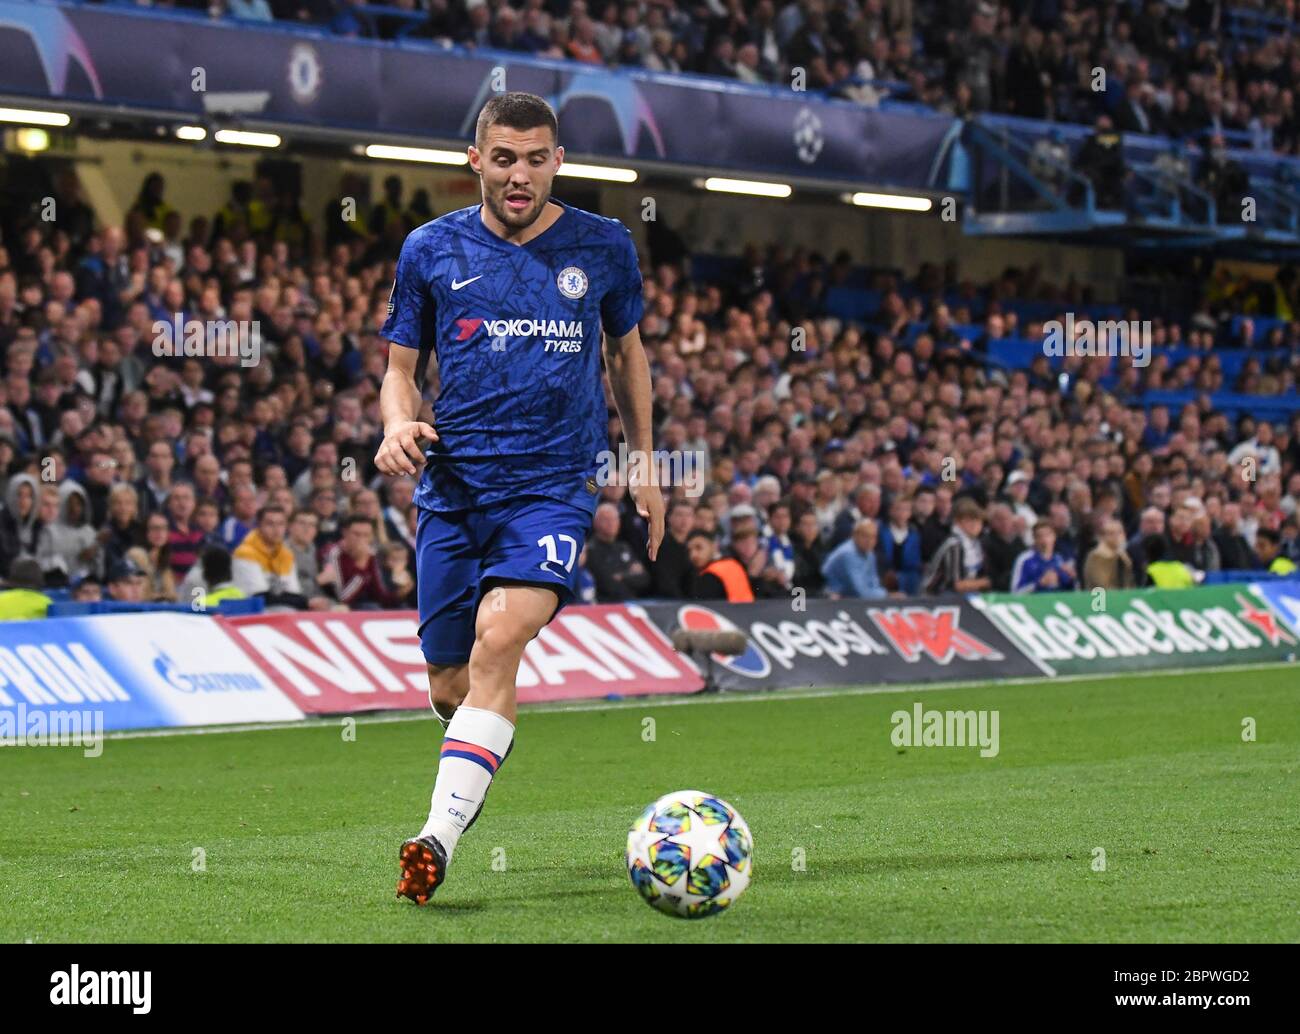 LONDON, ENGLAND - SEPTEMBER 17, 2019: Mateo Kovacic of Chelsea pictured during the 2019/20 UEFA Champions League Group H game between Chelsea FC (England) and Valencia CF (Spain) at Stamford Bridge. Stock Photo